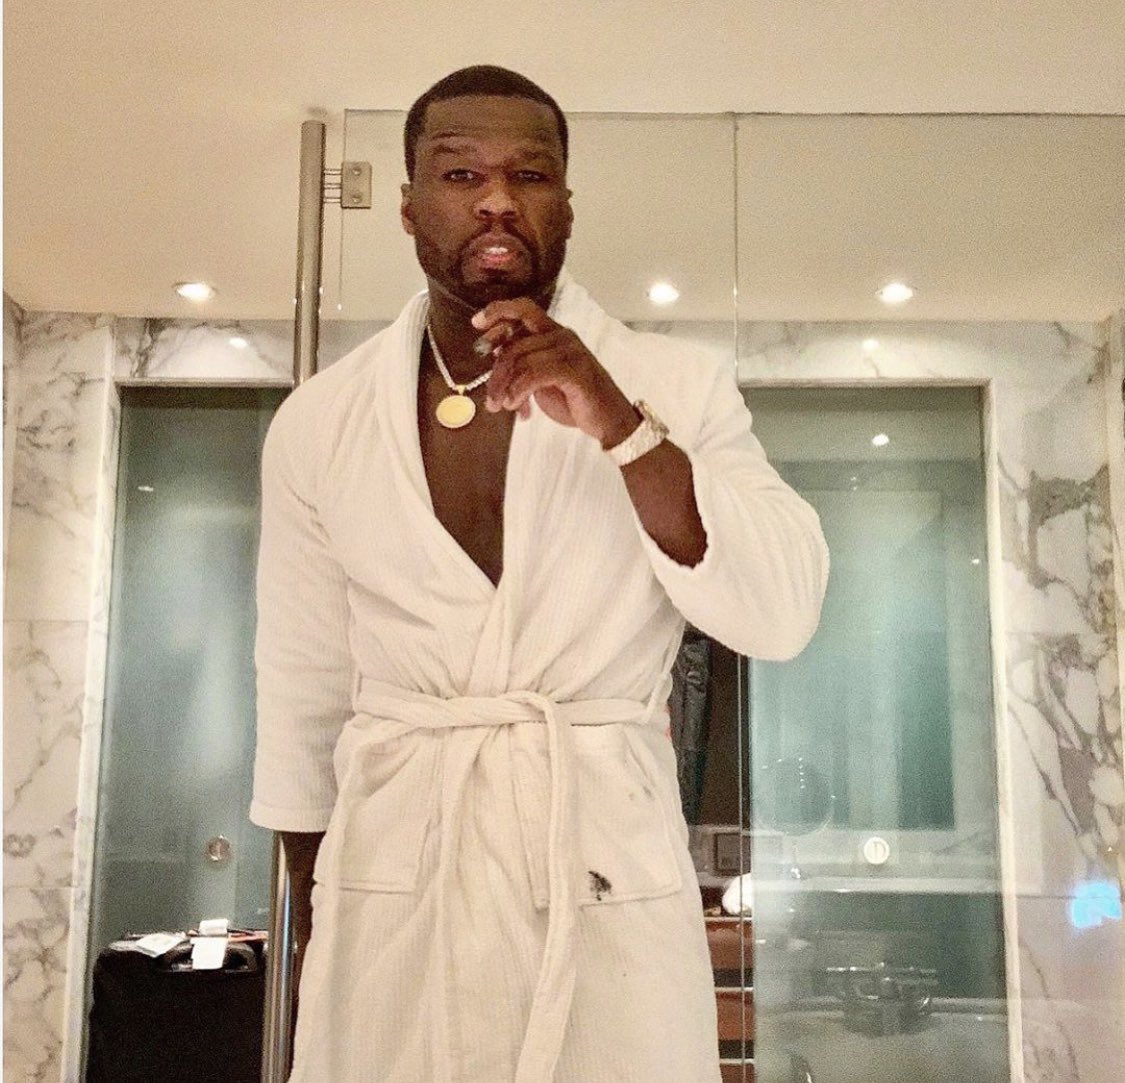 Girl you taking forever,????how long it take you to get dressed. ????????‍♂️#lecheminduroi #bransoncognac https://t.co/sKYhi5IOCk